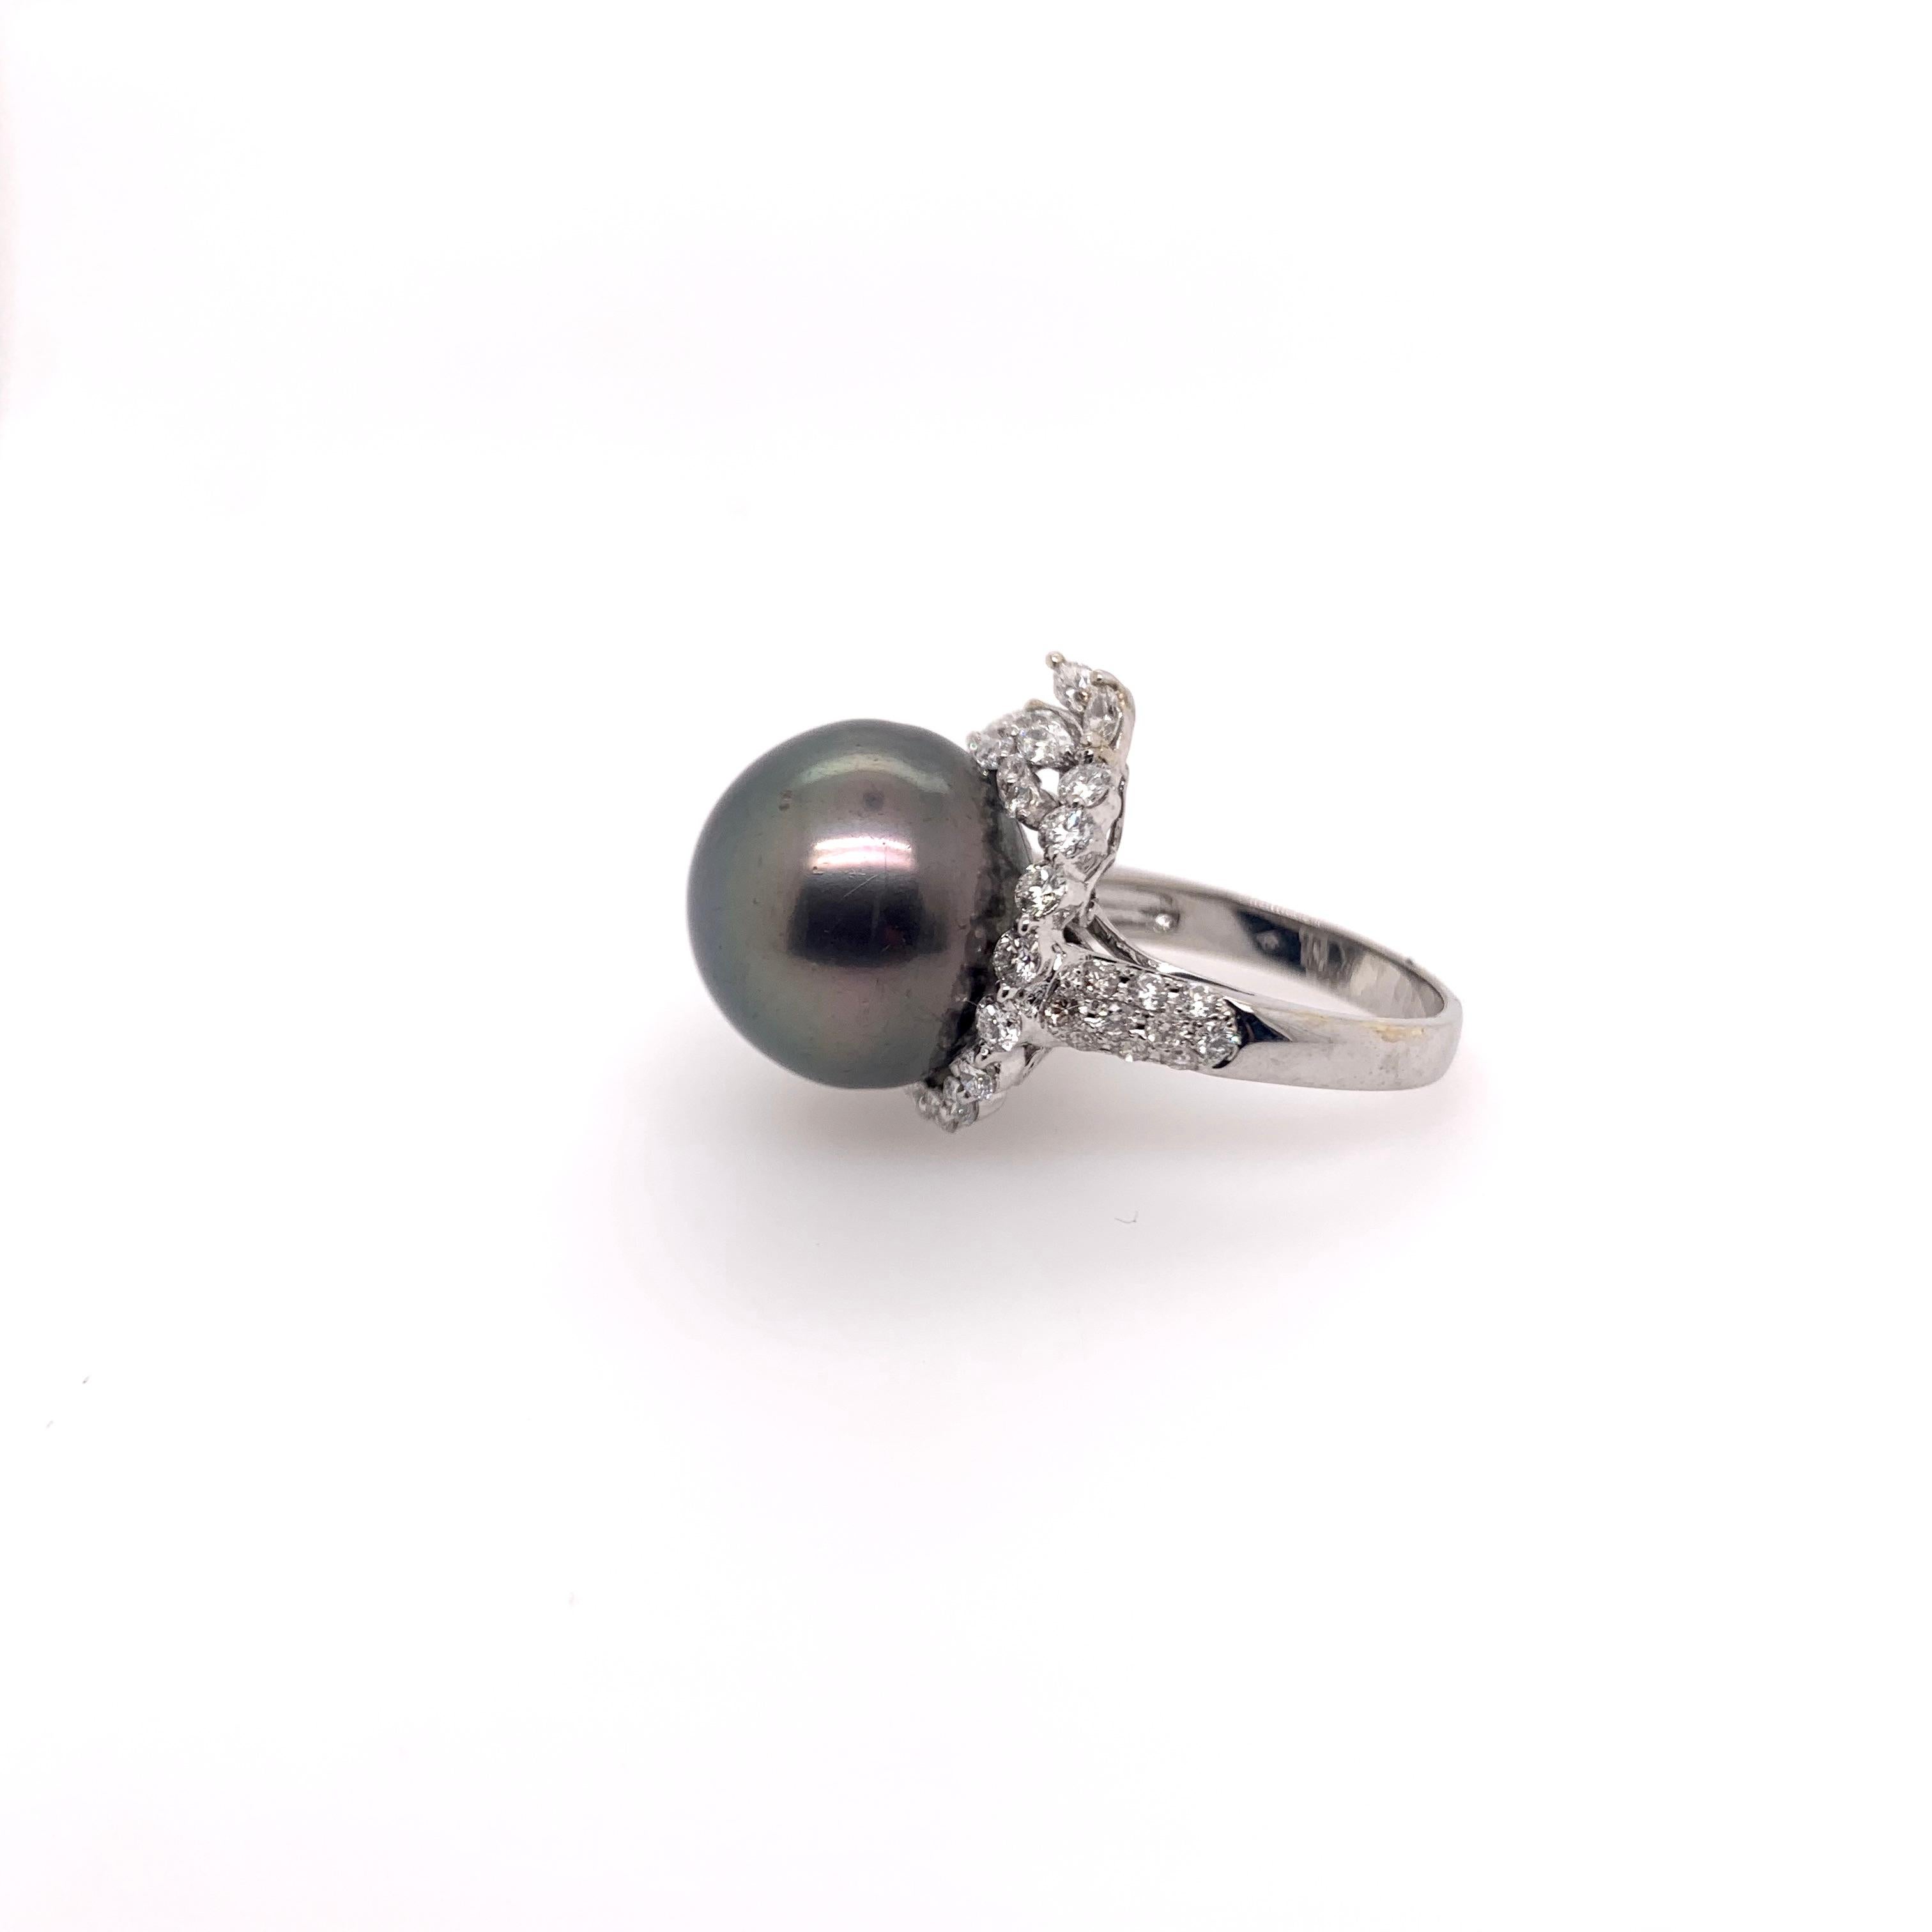 Stunning 15mm black Tahitian pearl ring set in an asymmetrical diamond wrap around setting!   The pearl is generous in size with superb luster.   The round brilliant diamonds surround the pearl and has a slight flare on one end with marquis diamonds